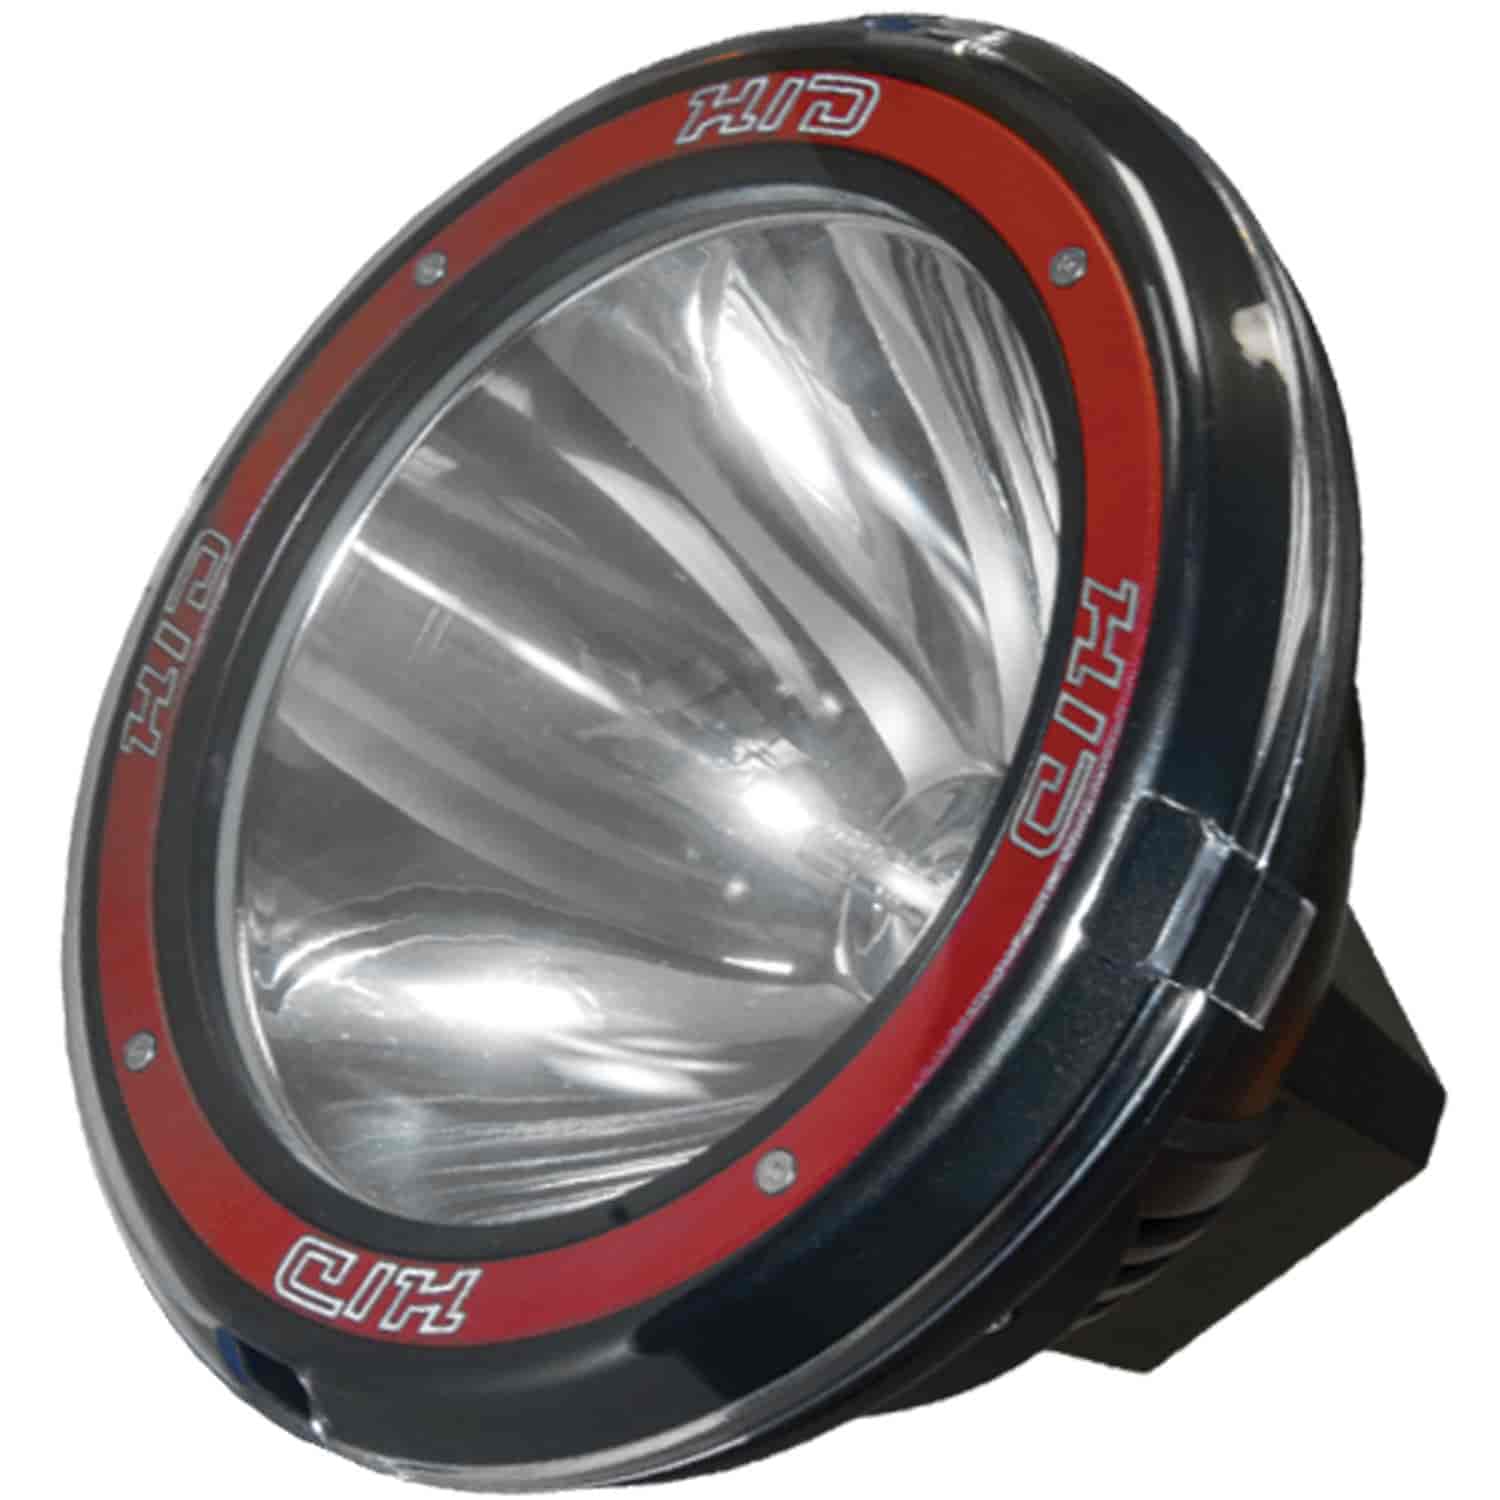 A10 HID Off-Road Light This 9" round light uses a Xenon HID bulb